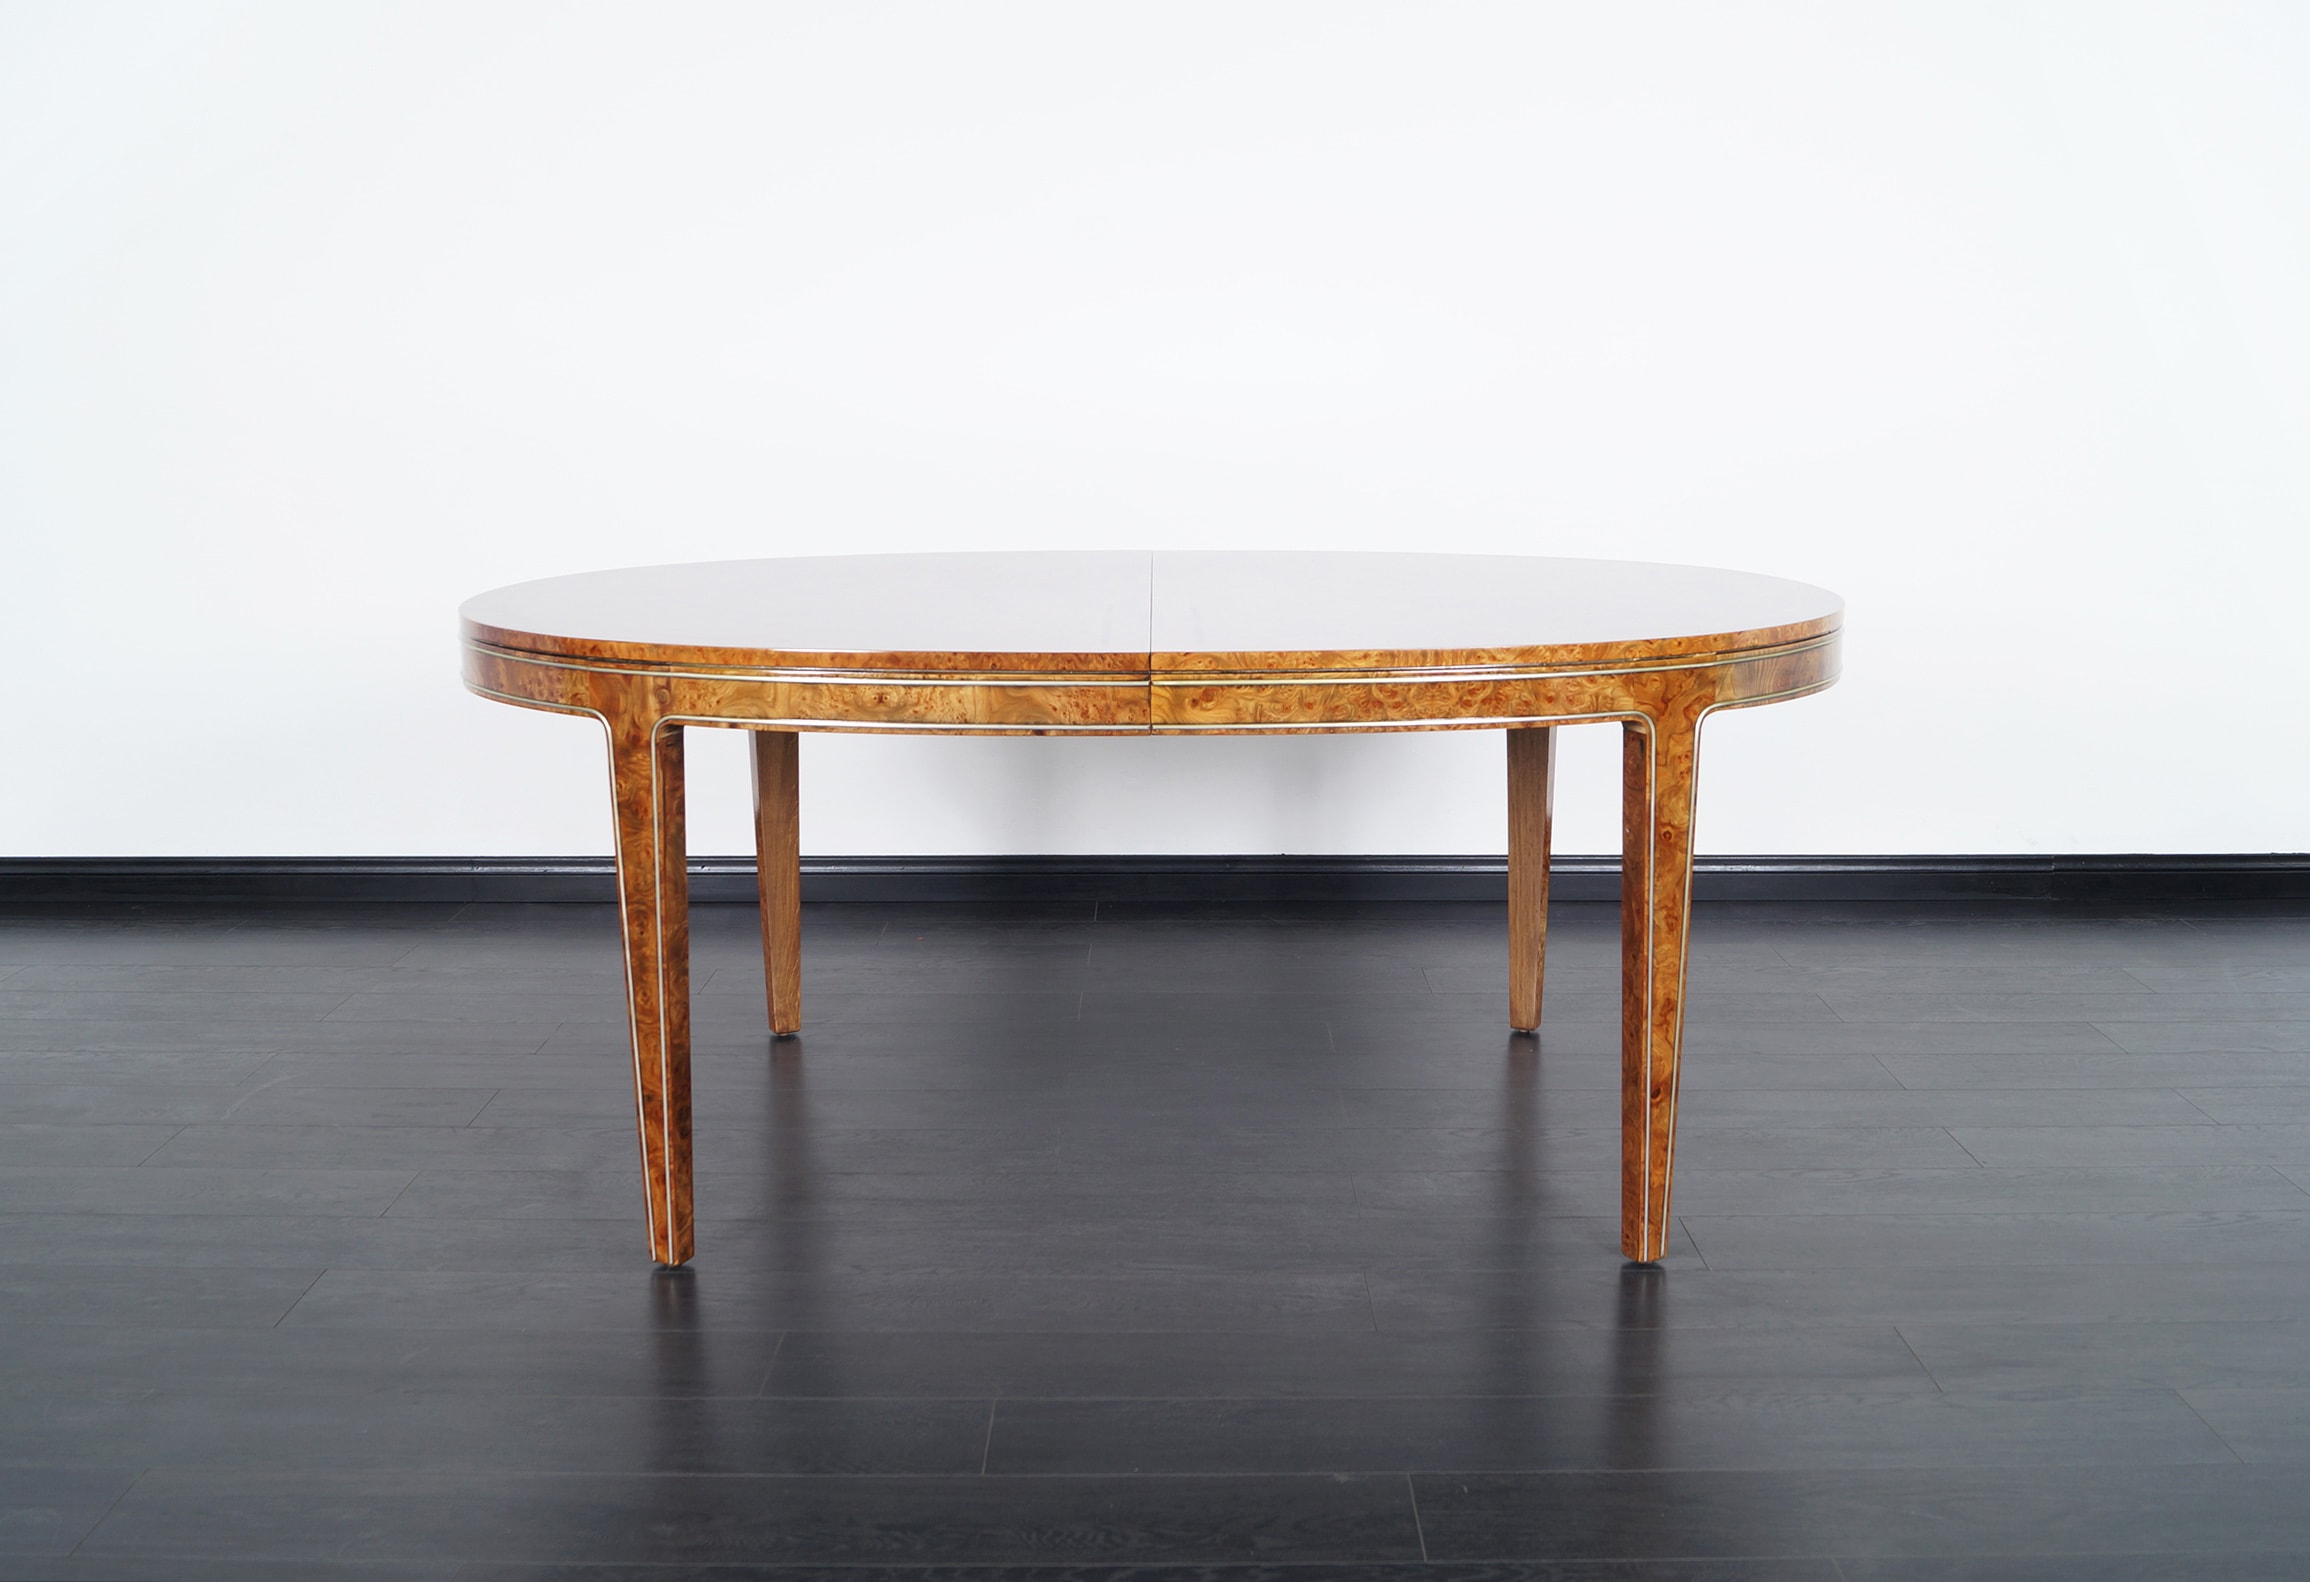 Vintage Burl Wood Dining Table by Mastercraft